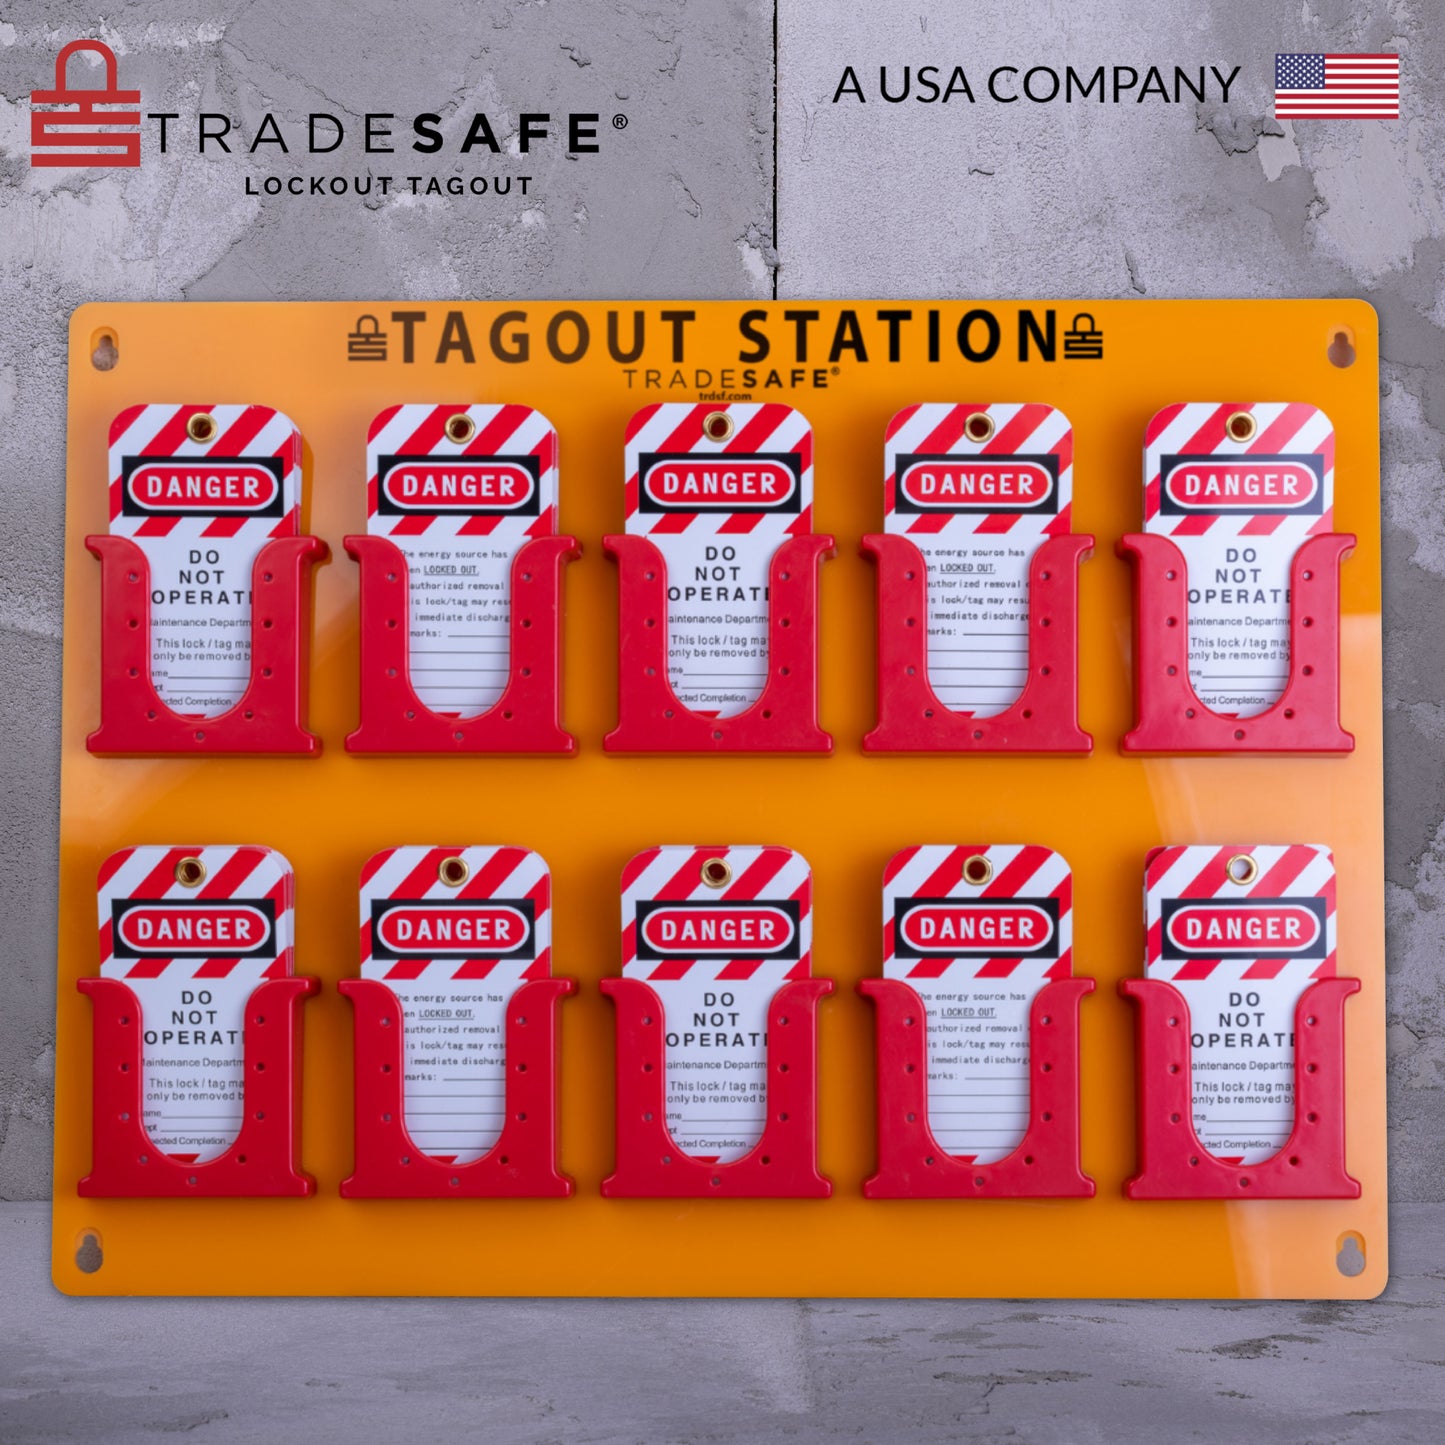 eye-level view of an orange tag station with 10 red tag boxes stocked with loto tags with a concrete background